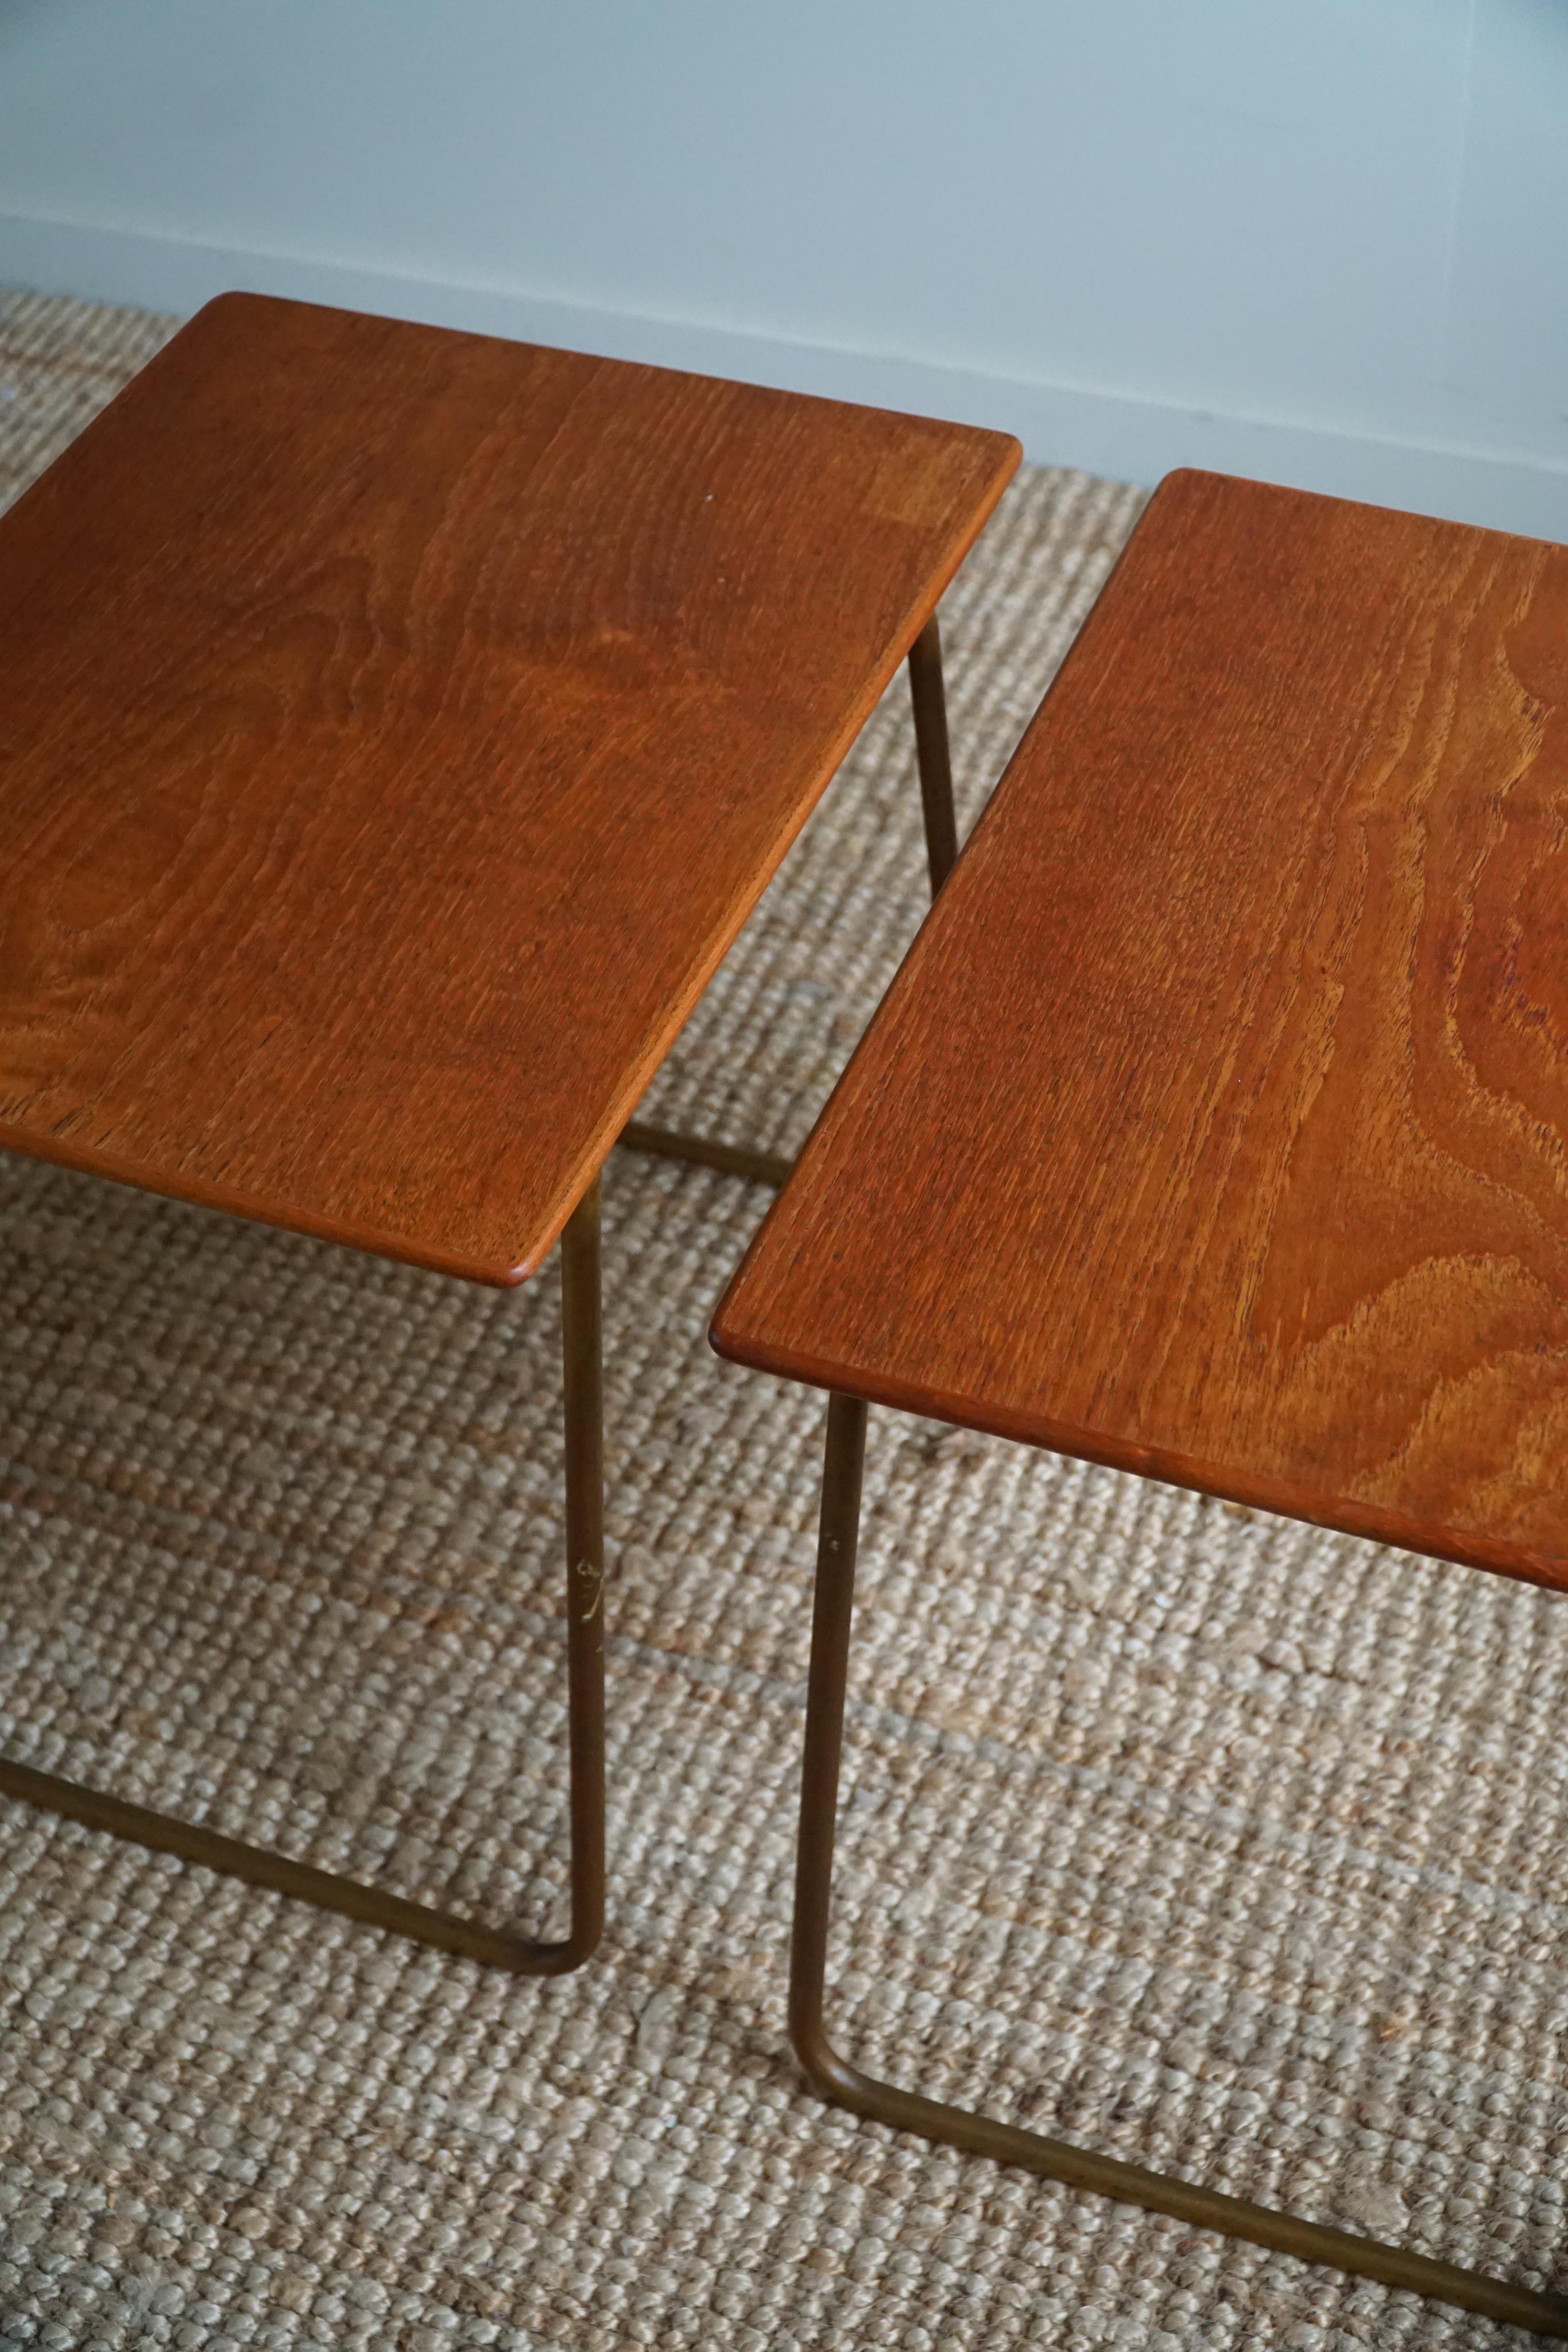 Pair of Side Tables in Teak and Steel, Danish Mid Century, 1960s For Sale 4